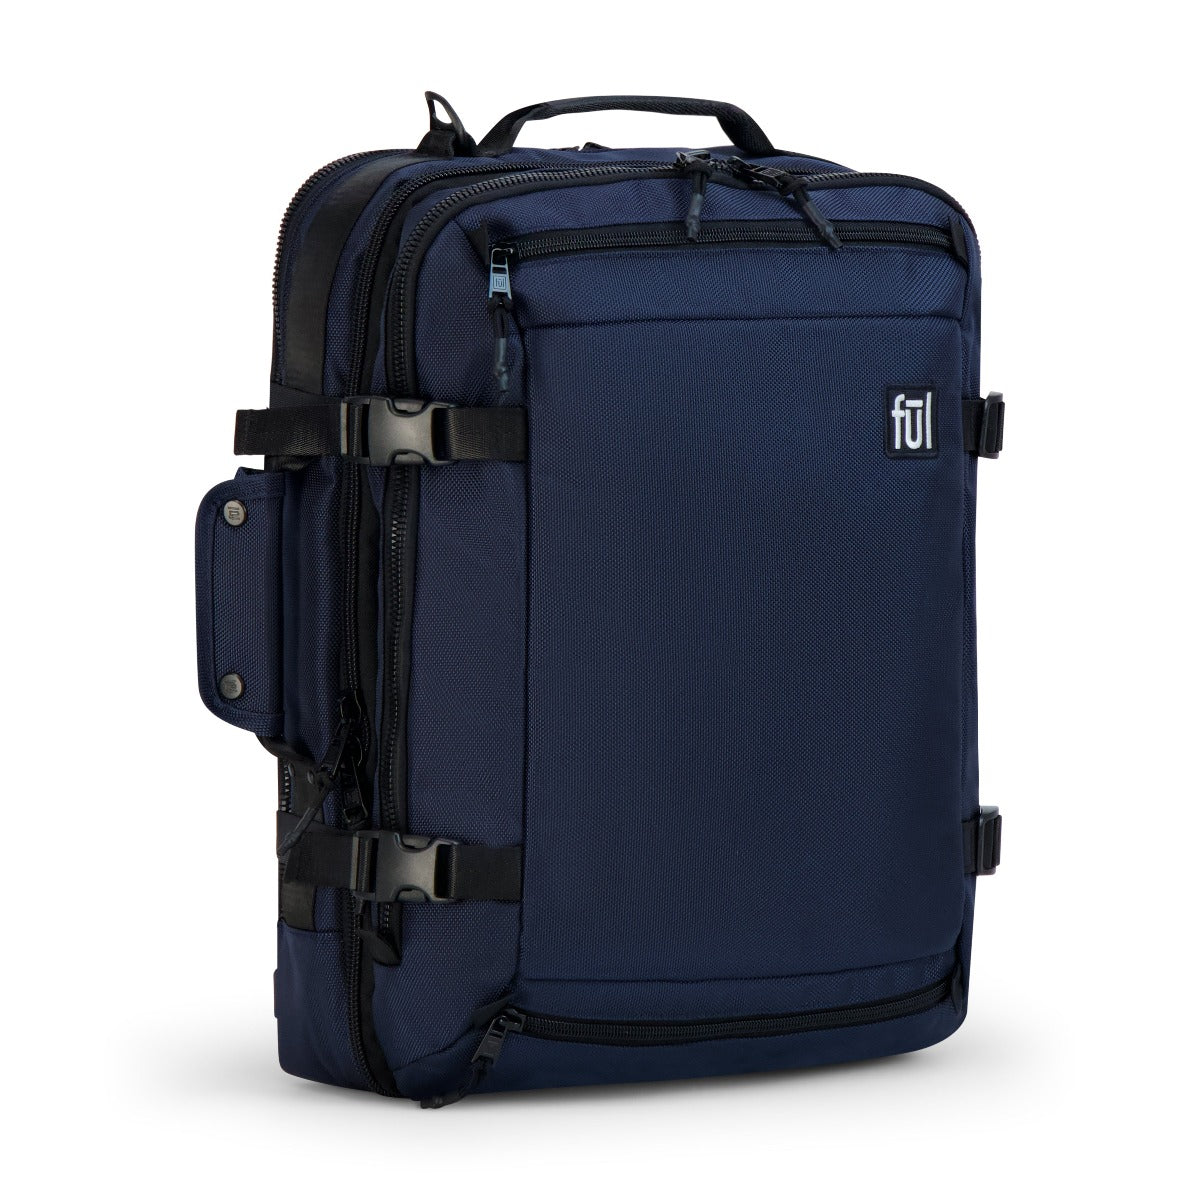 ful ridge collection cruiser travel backpack navy blue - convertible carry-on backpacks